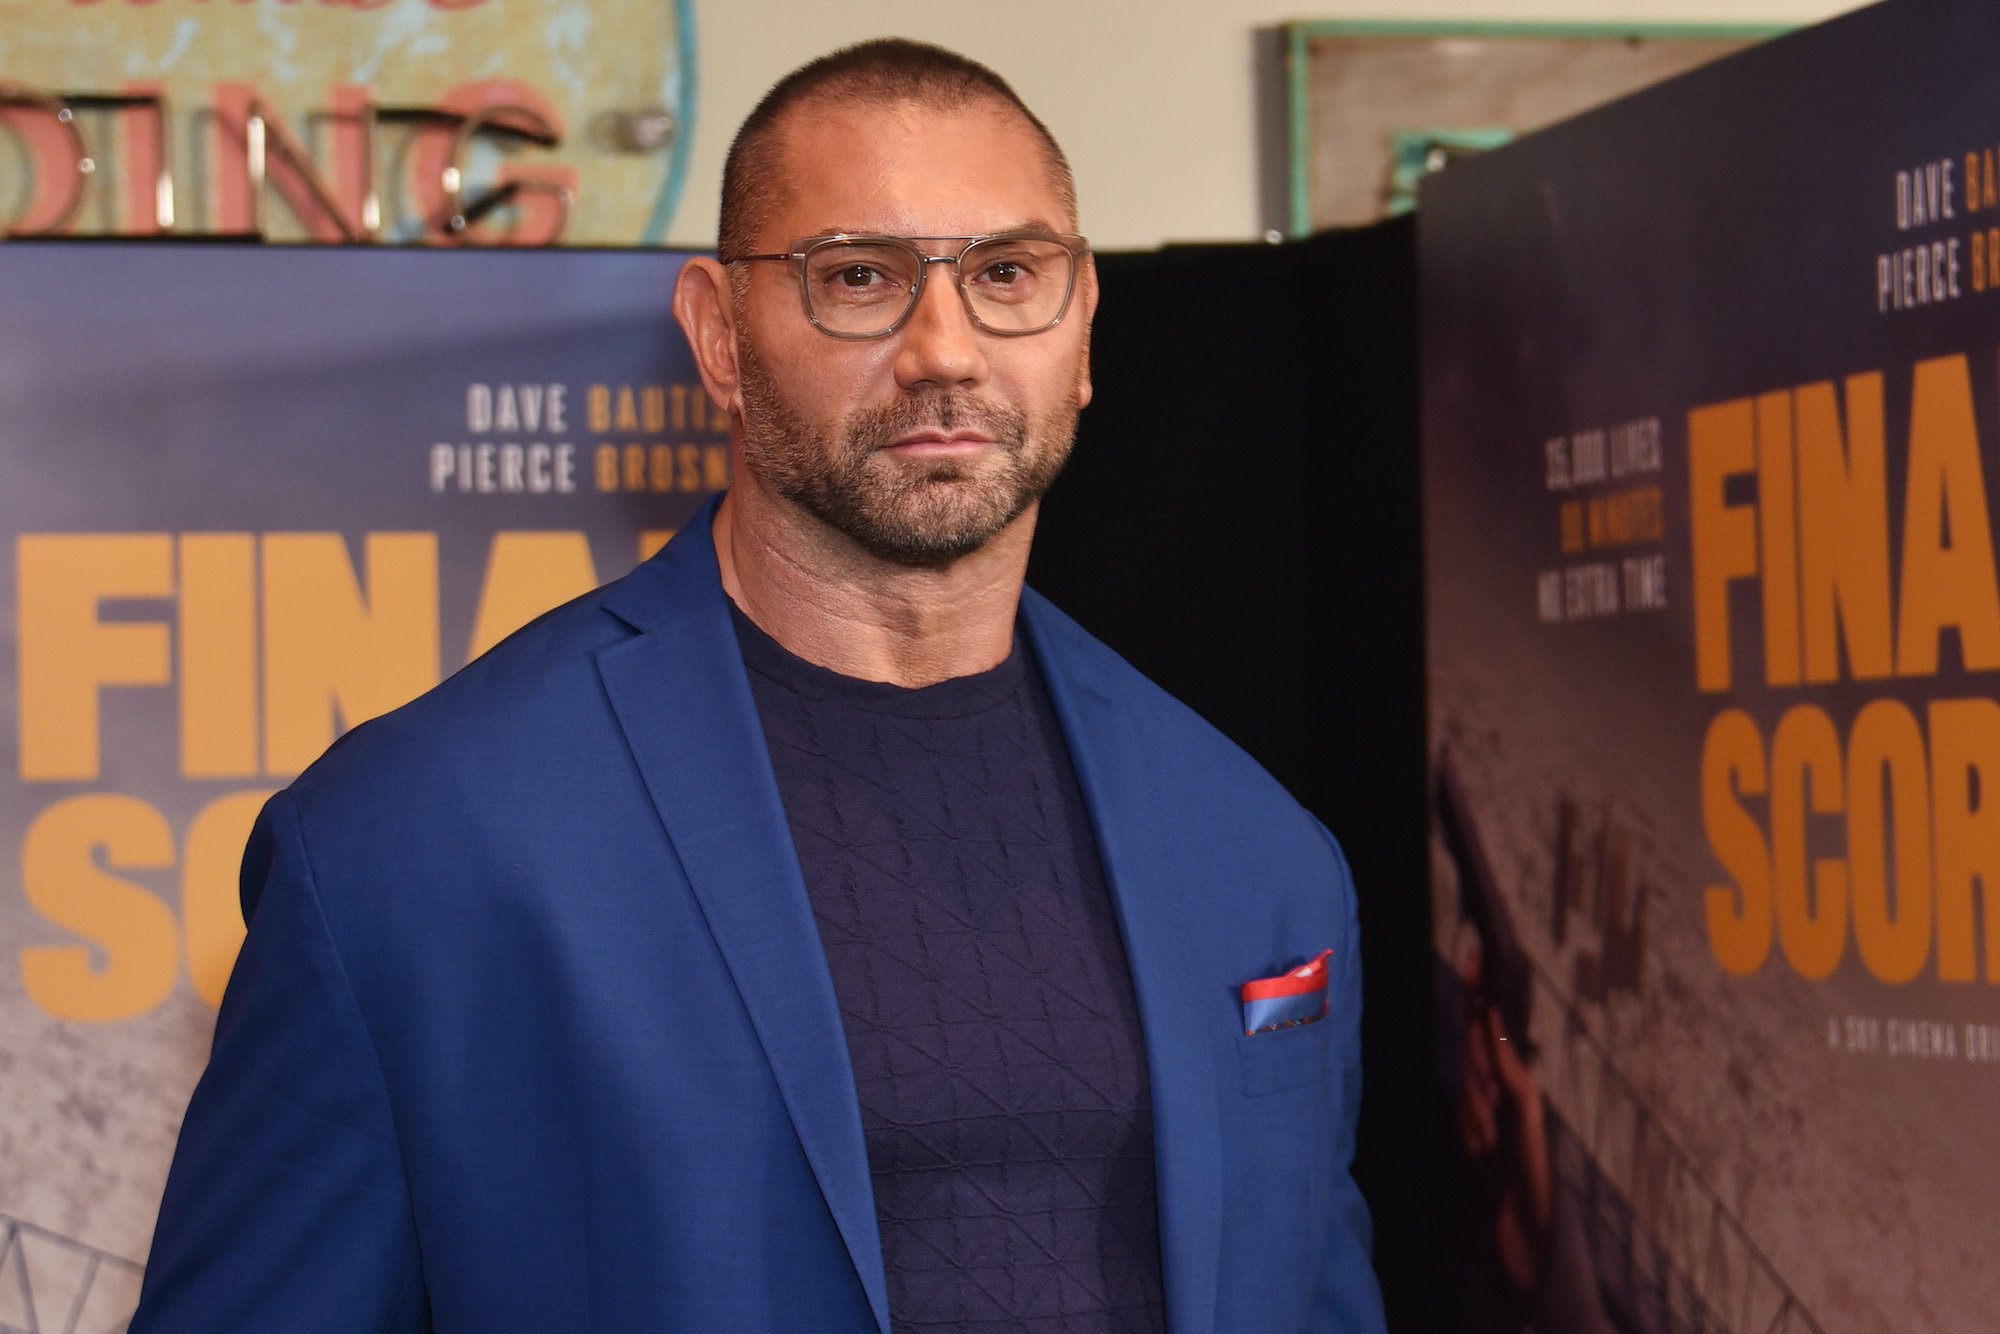 Dave Bautista smiling in front of a blurred background